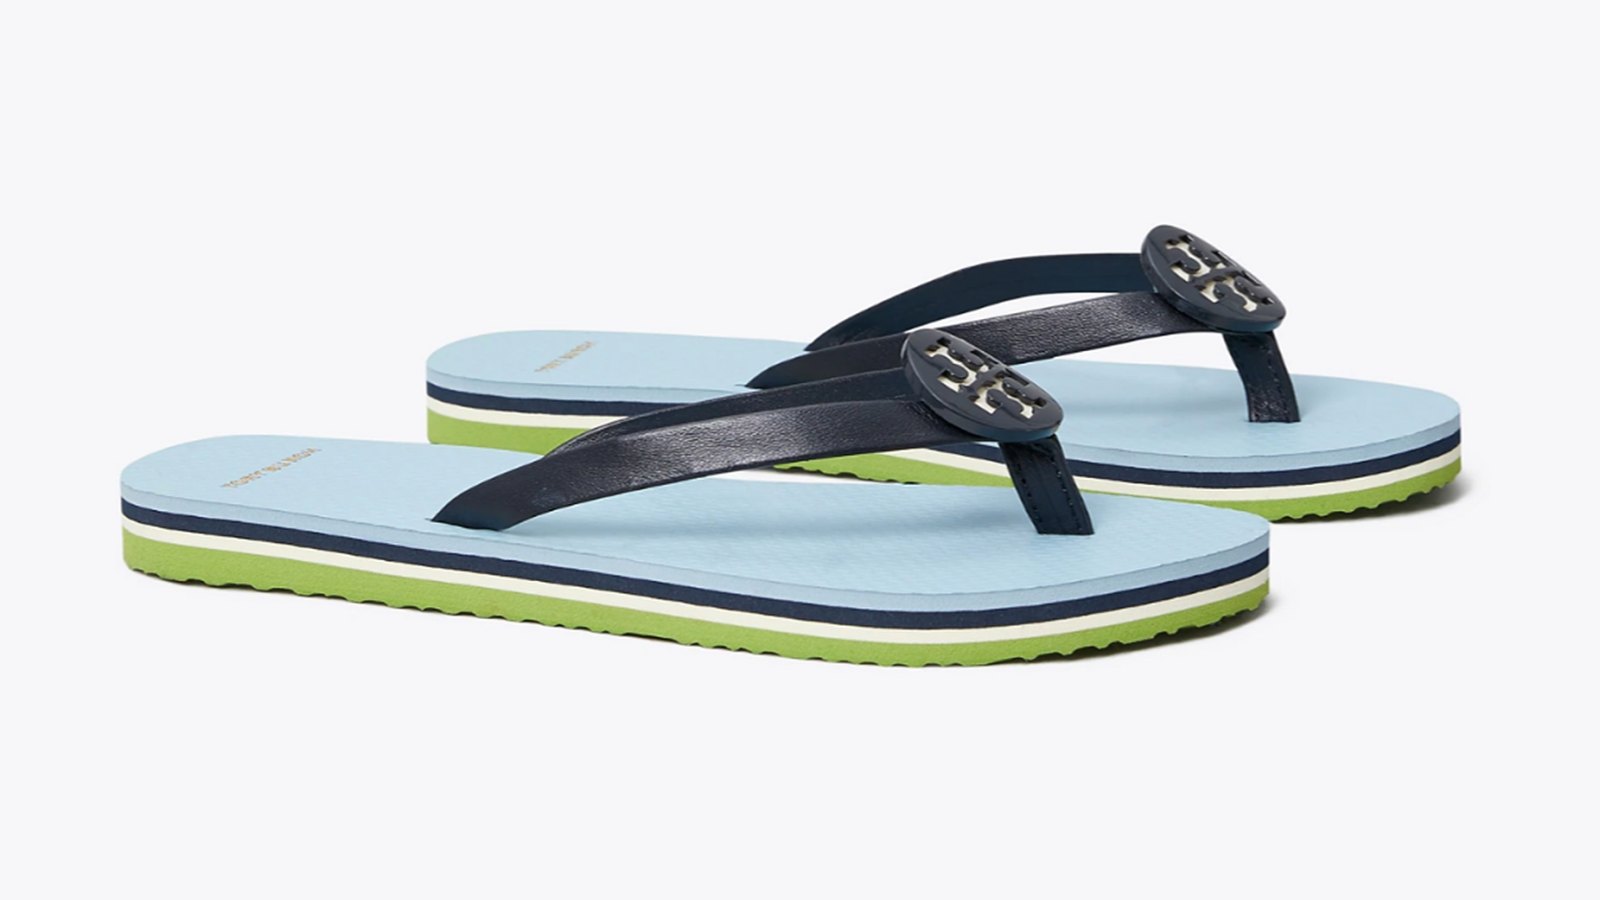 Tory Burch Flip Flops Are 50% Off Just in Time for Sandal Season